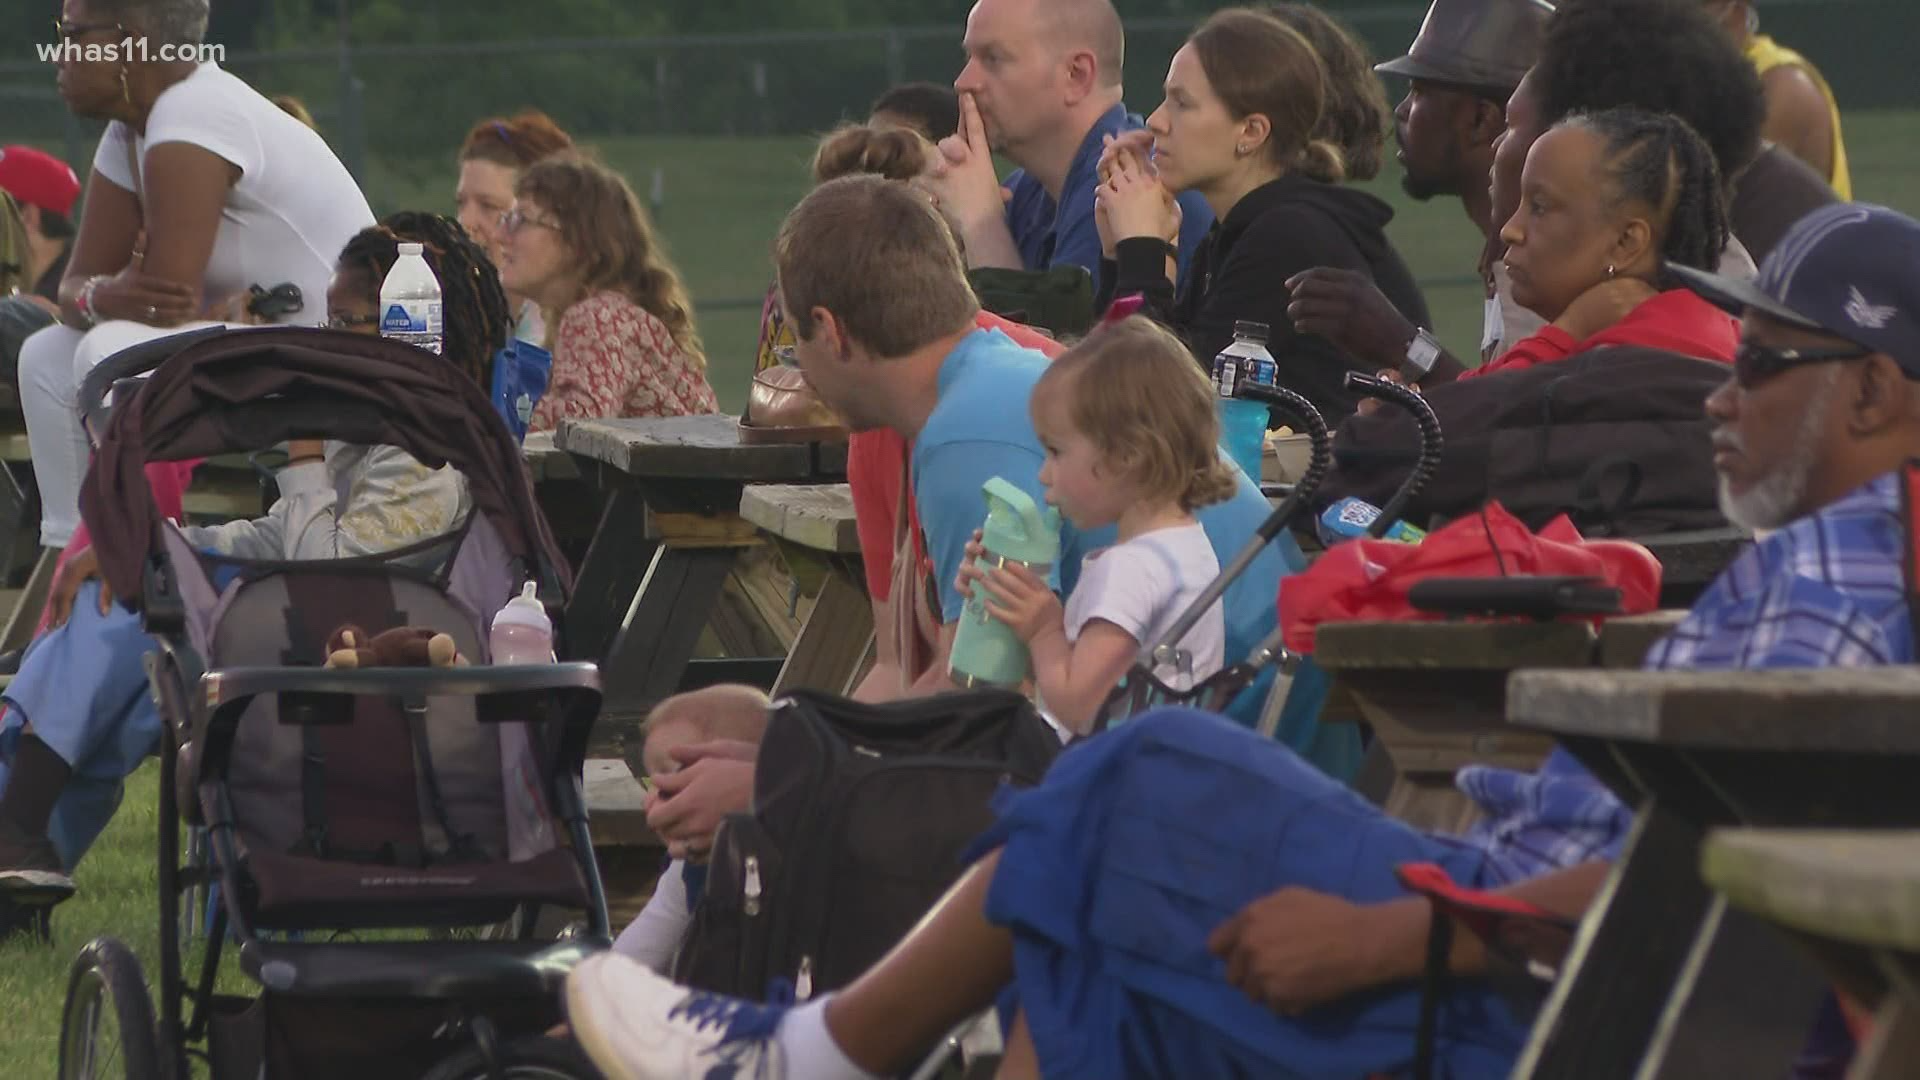 Louisville Orchestra, Jason Clayborn and Daria Raymore present an evening of American Soul at Shawnee Park with free music.